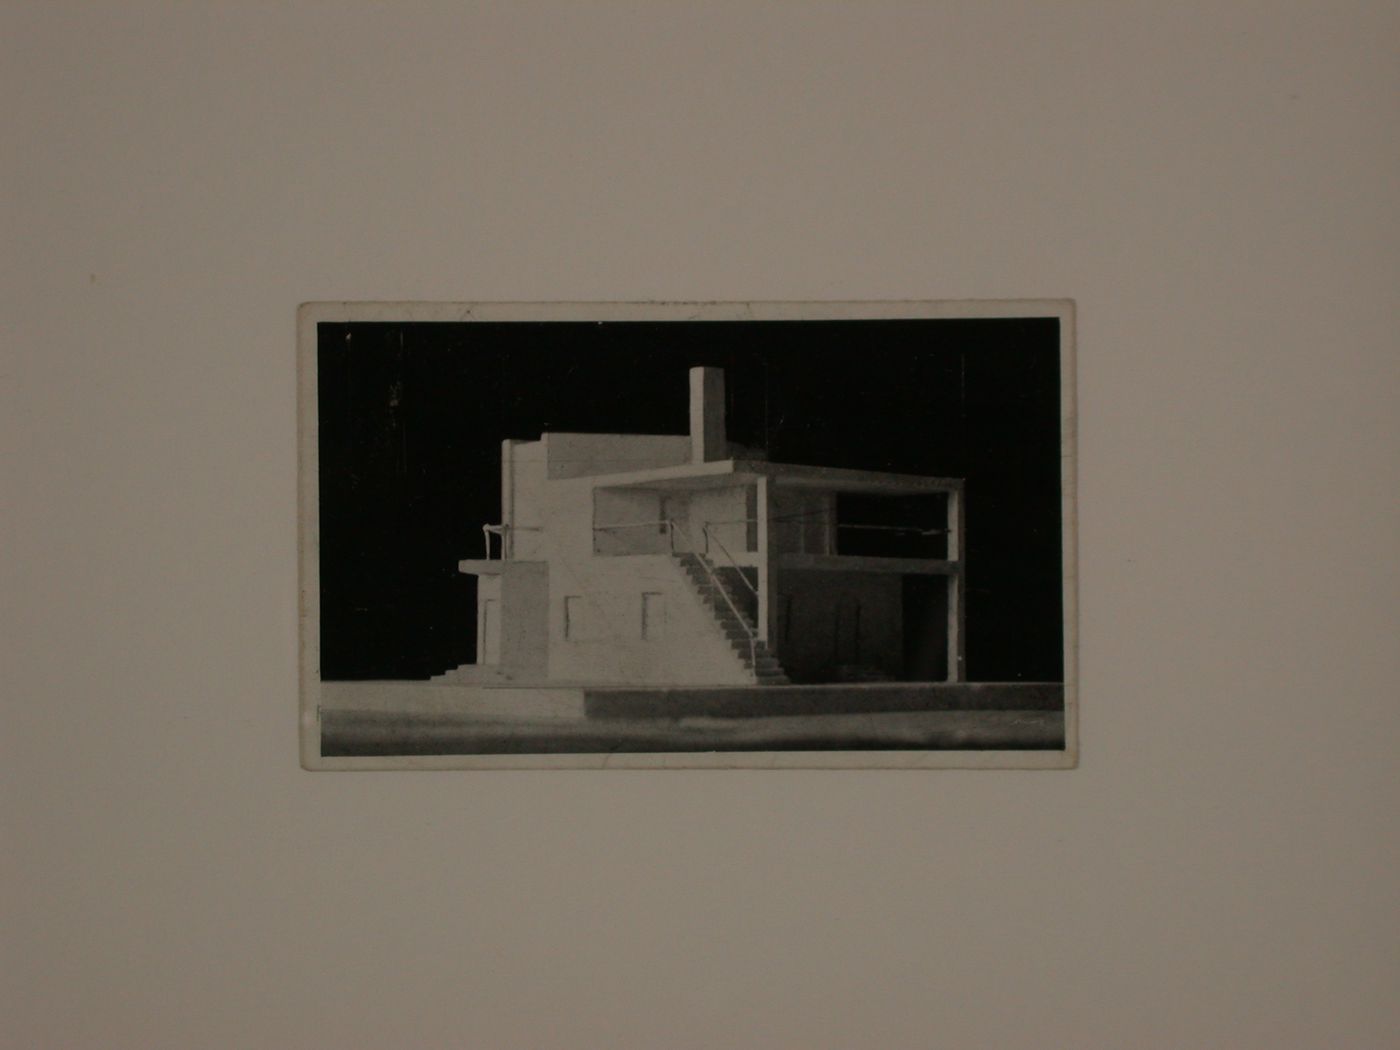 Photograph of the model of an unidentified building